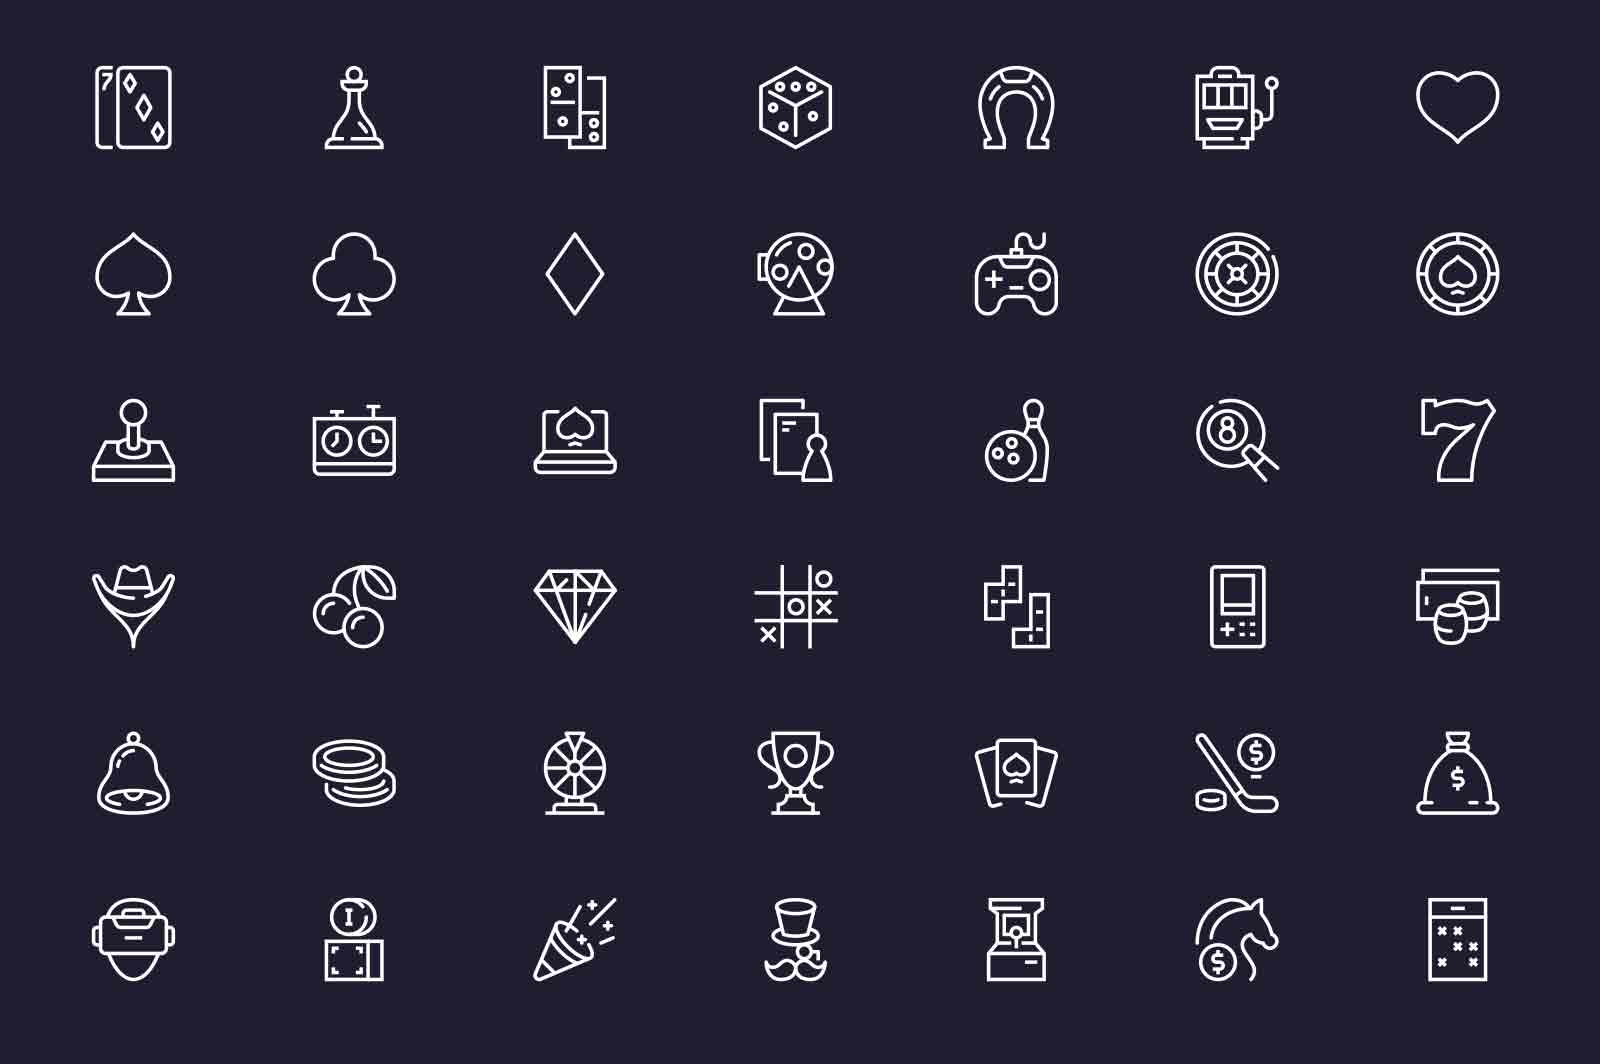 Games for fun pastime icons set vector illustration. Train brain in online games line icon. Dark background